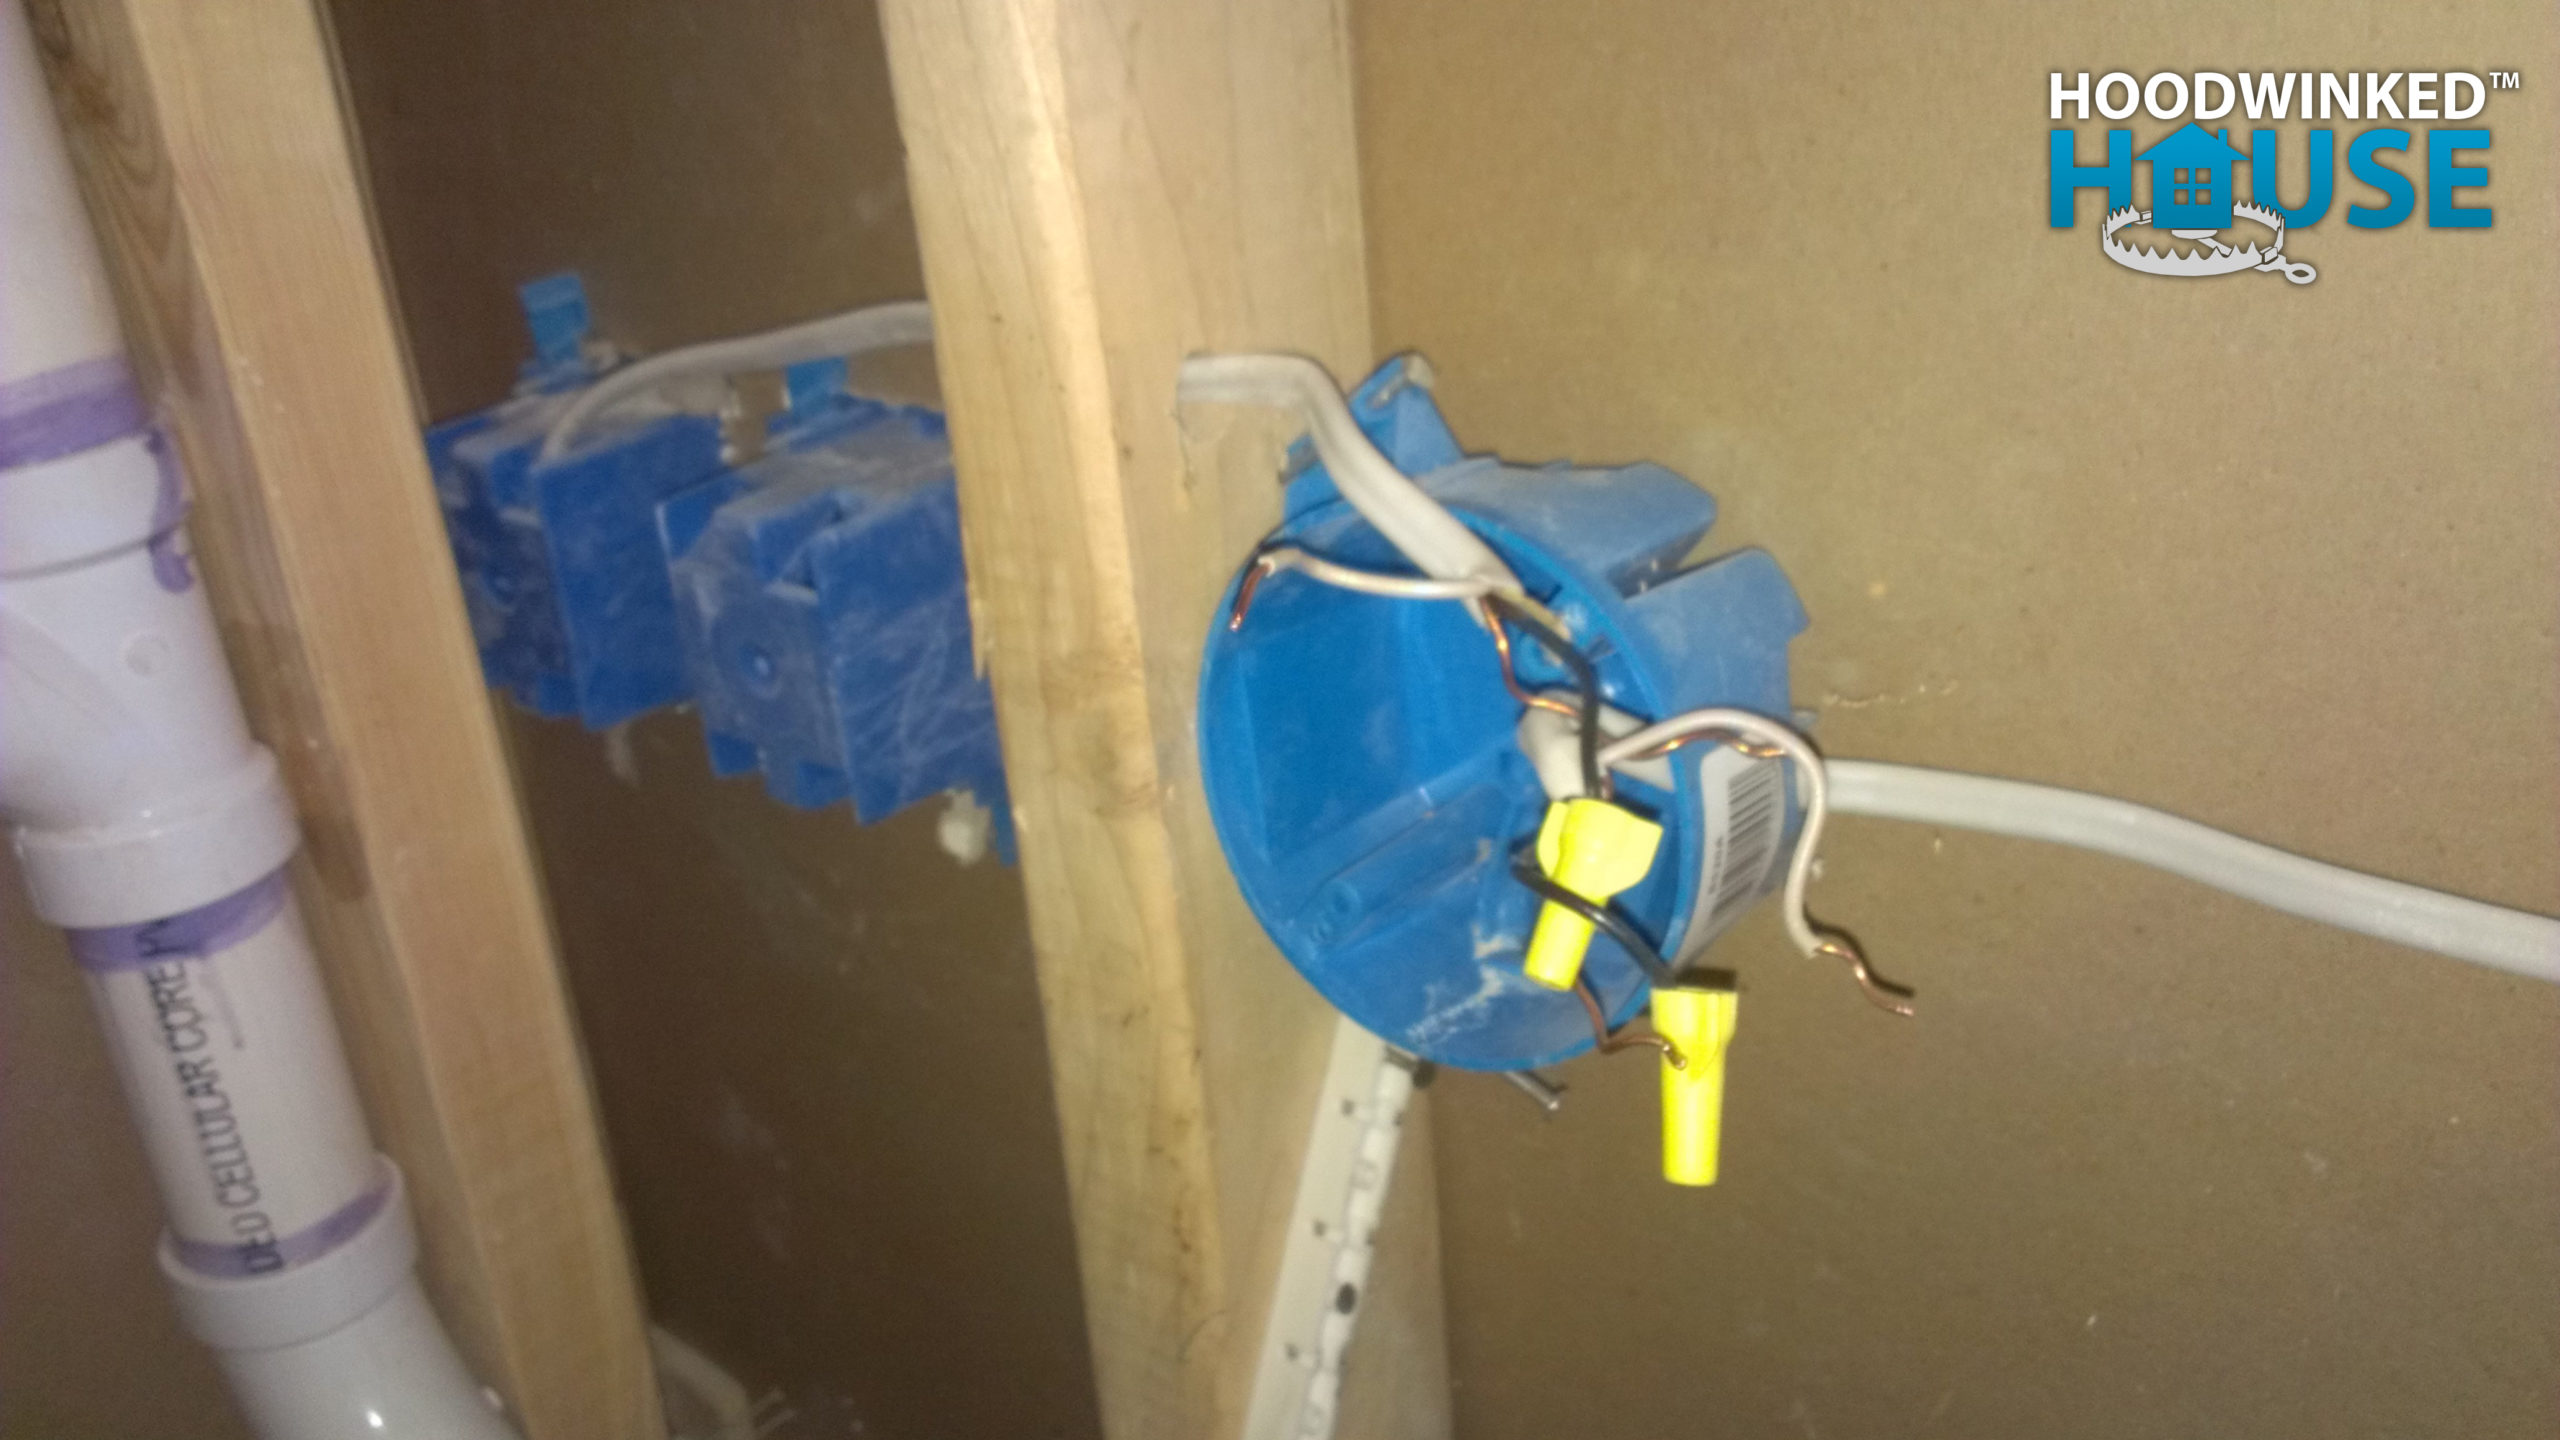 A round ceiling junction box was used inside wall framing and illegally hidden behind drywall.